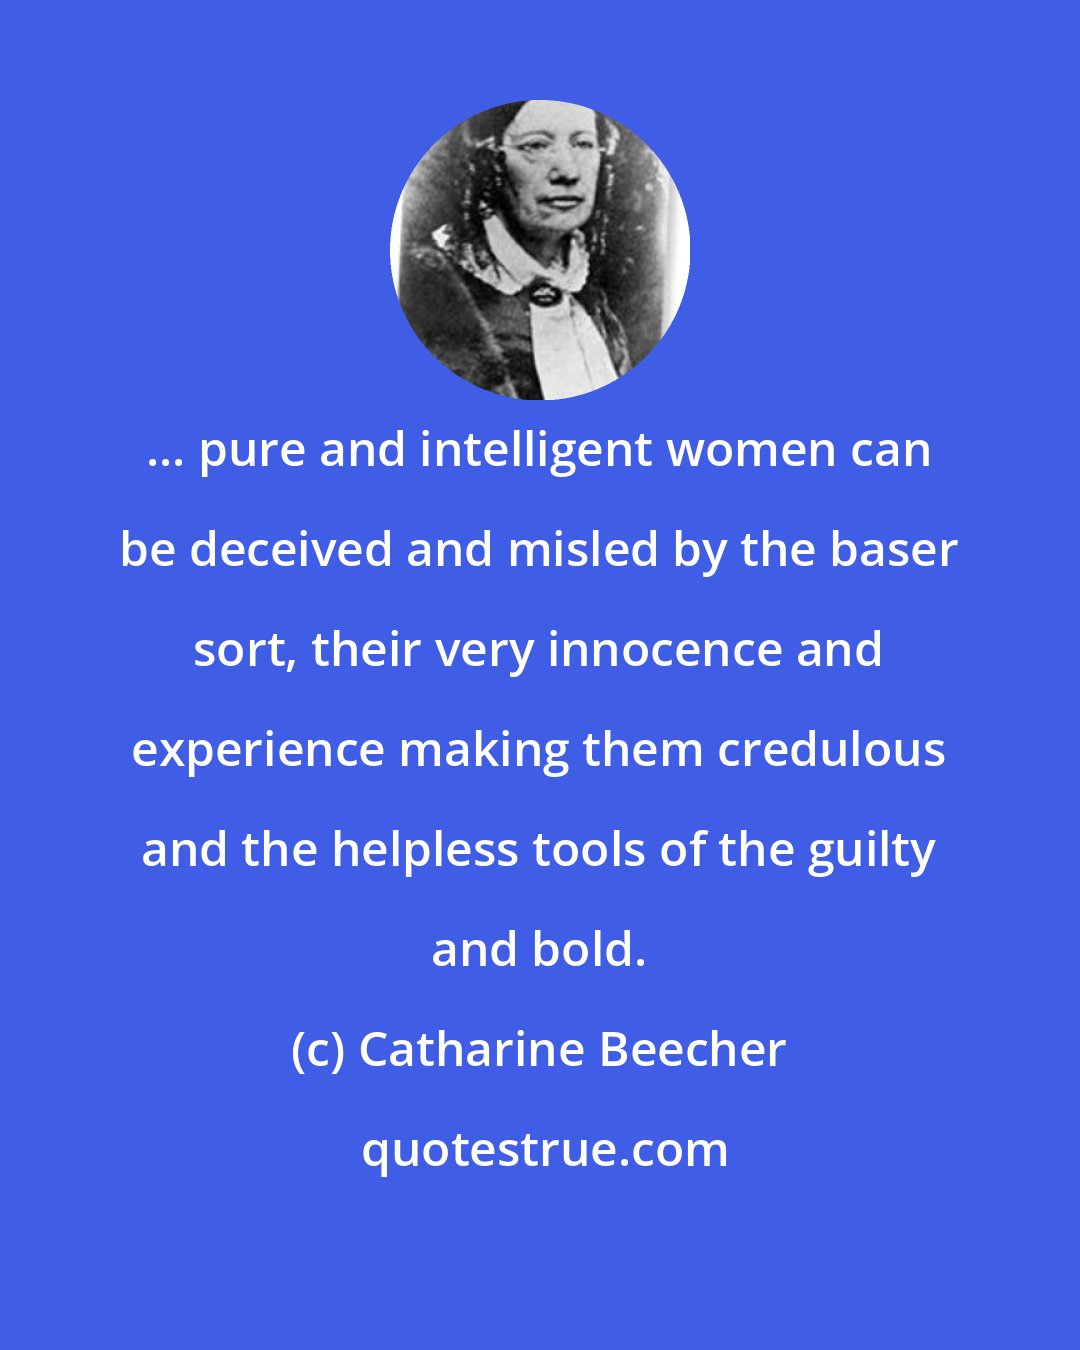 Catharine Beecher: ... pure and intelligent women can be deceived and misled by the baser sort, their very innocence and experience making them credulous and the helpless tools of the guilty and bold.